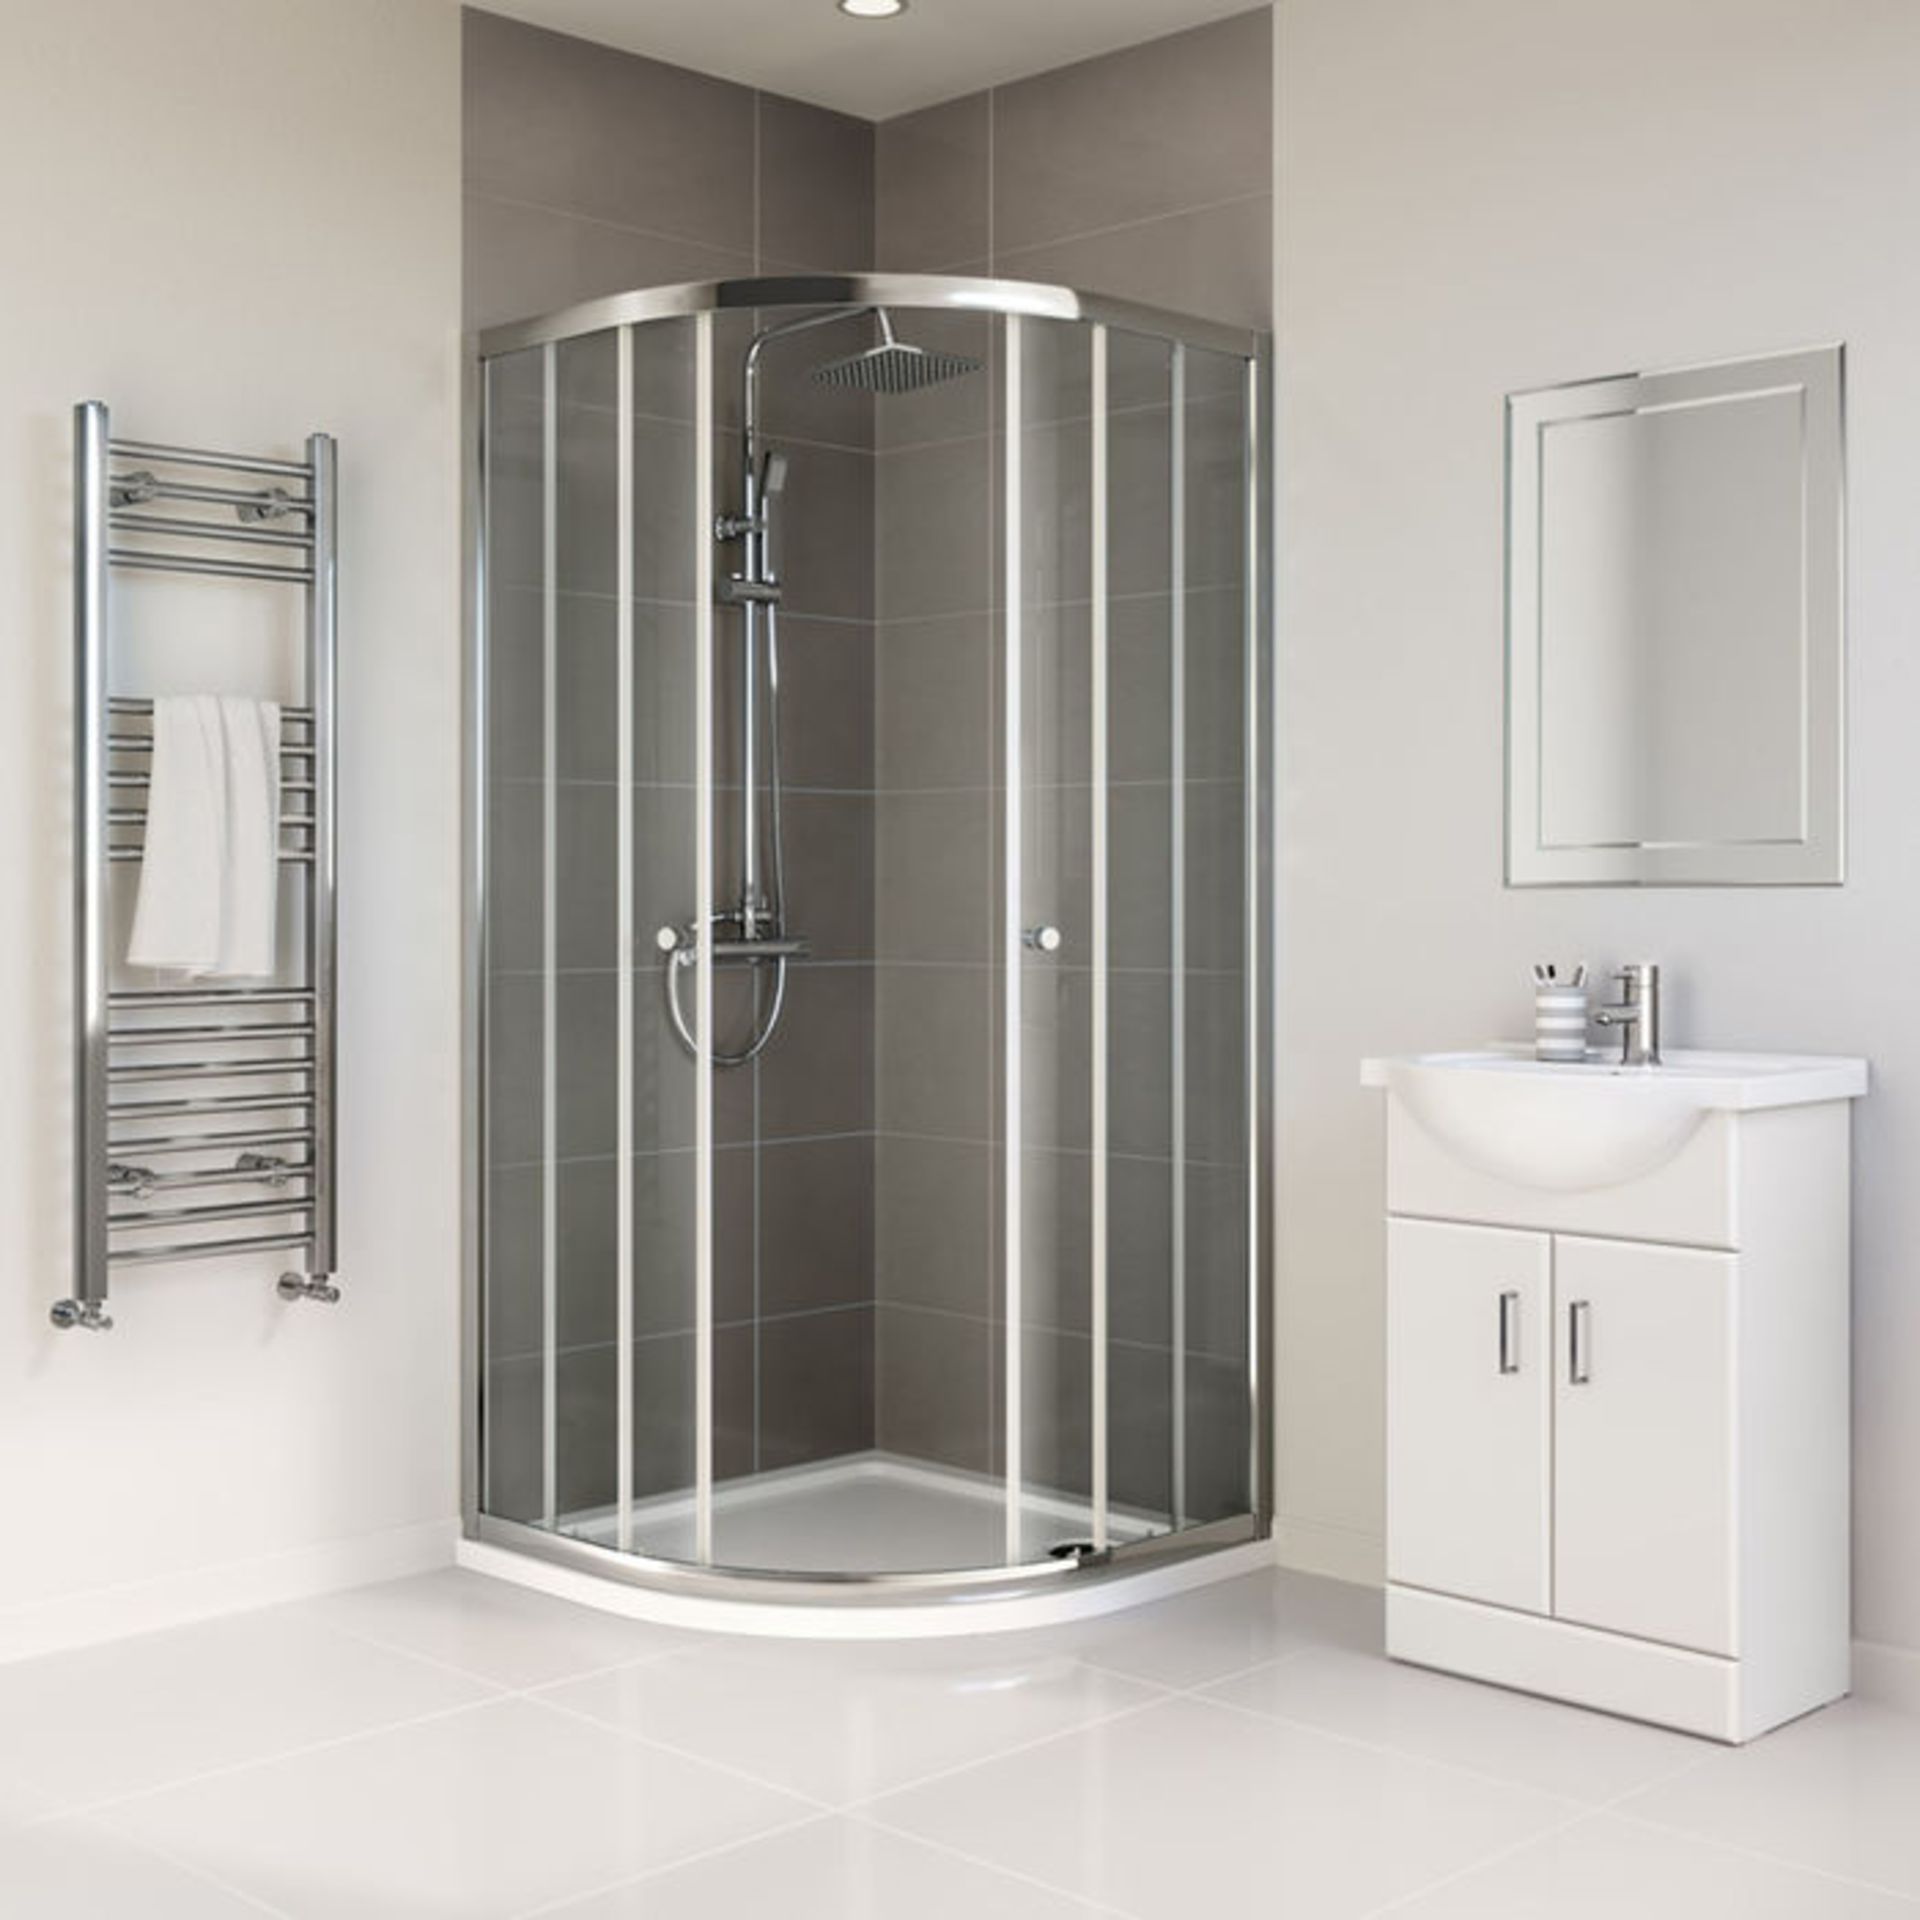 (DK262) 900x900mm - Elements Quadrant Shower Enclosure. 4mm Safety Glass Fully waterproof tested - Image 4 of 5